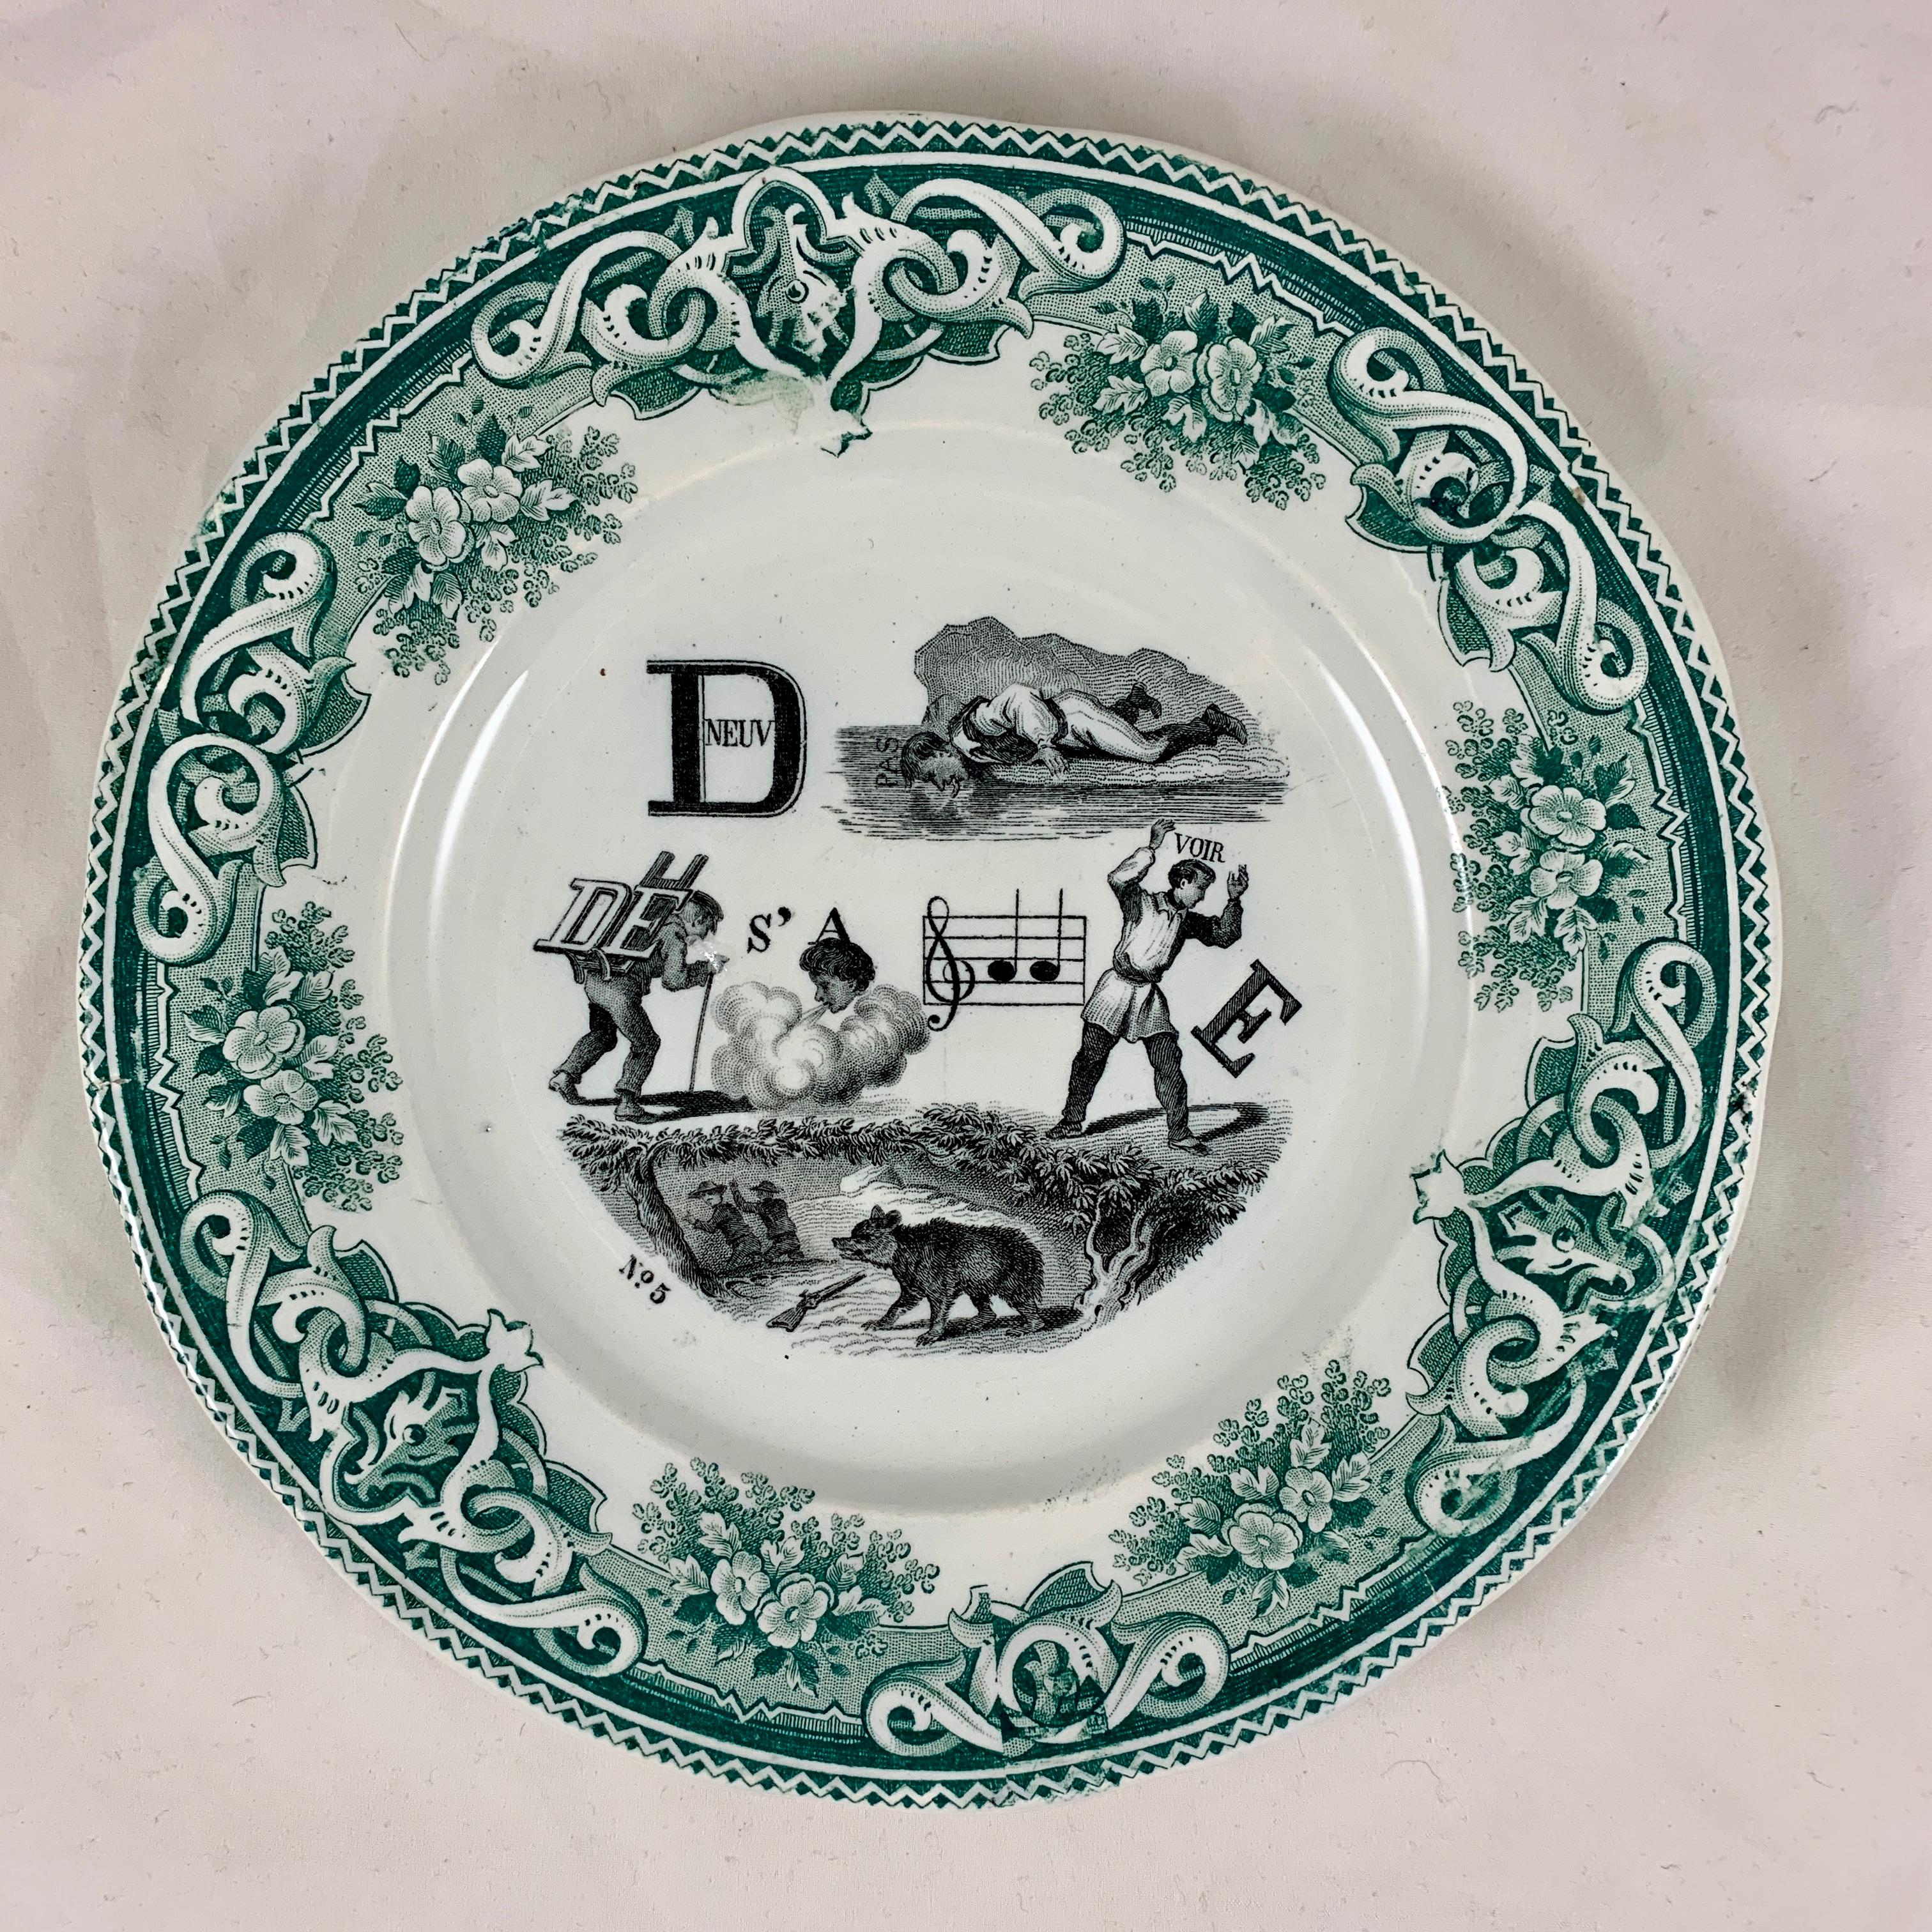 A set of six French Rebus Puzzle dessert plates, transfer printed in black on a white earthenware body bordered in green. When solved, the picture puzzle spells out a wise saying or maxim.

From the early 1800s into the early 1900s, most French